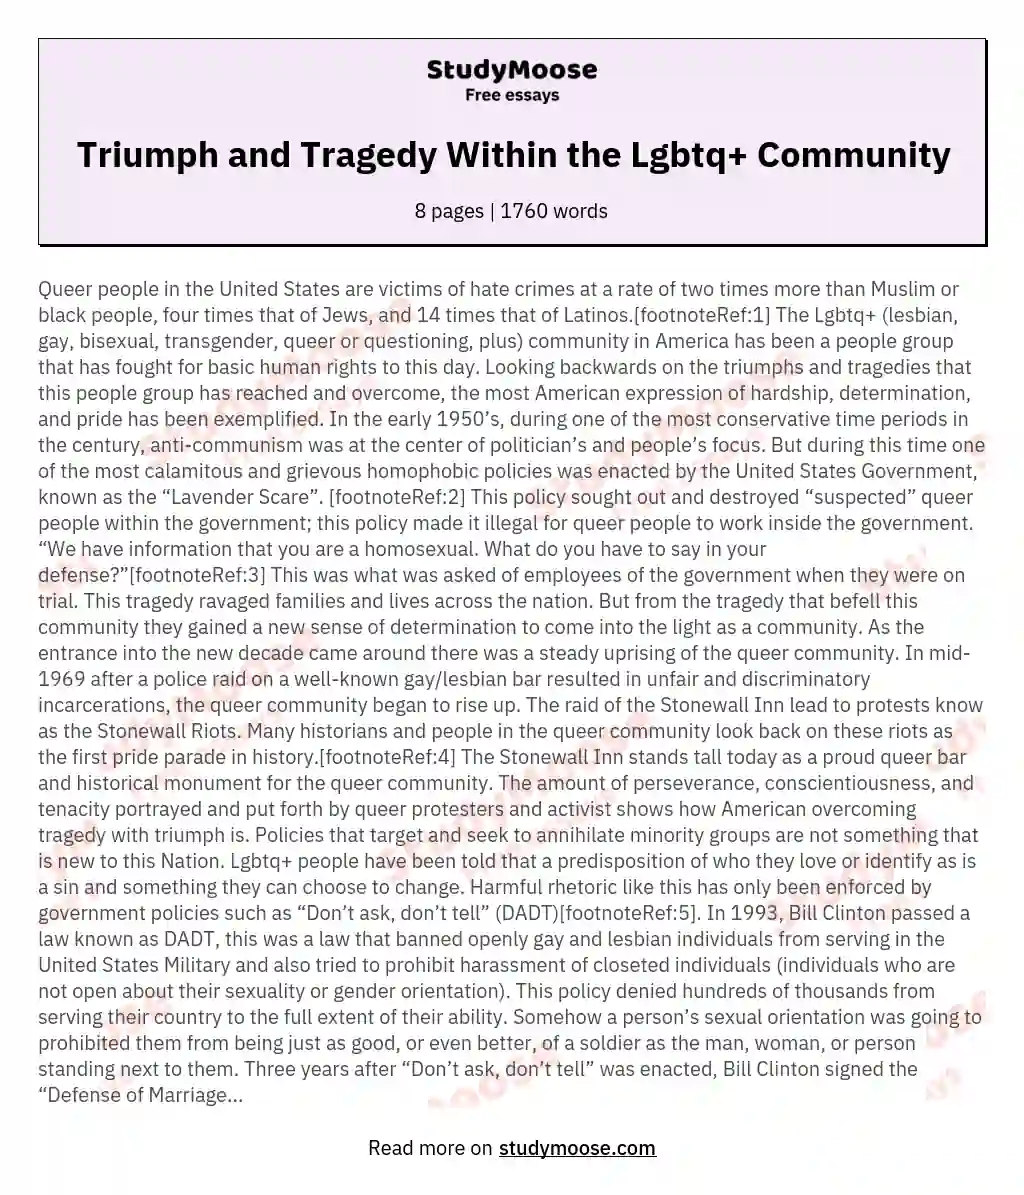 Triumph and Tragedy Within the Lgbtq+ Community essay